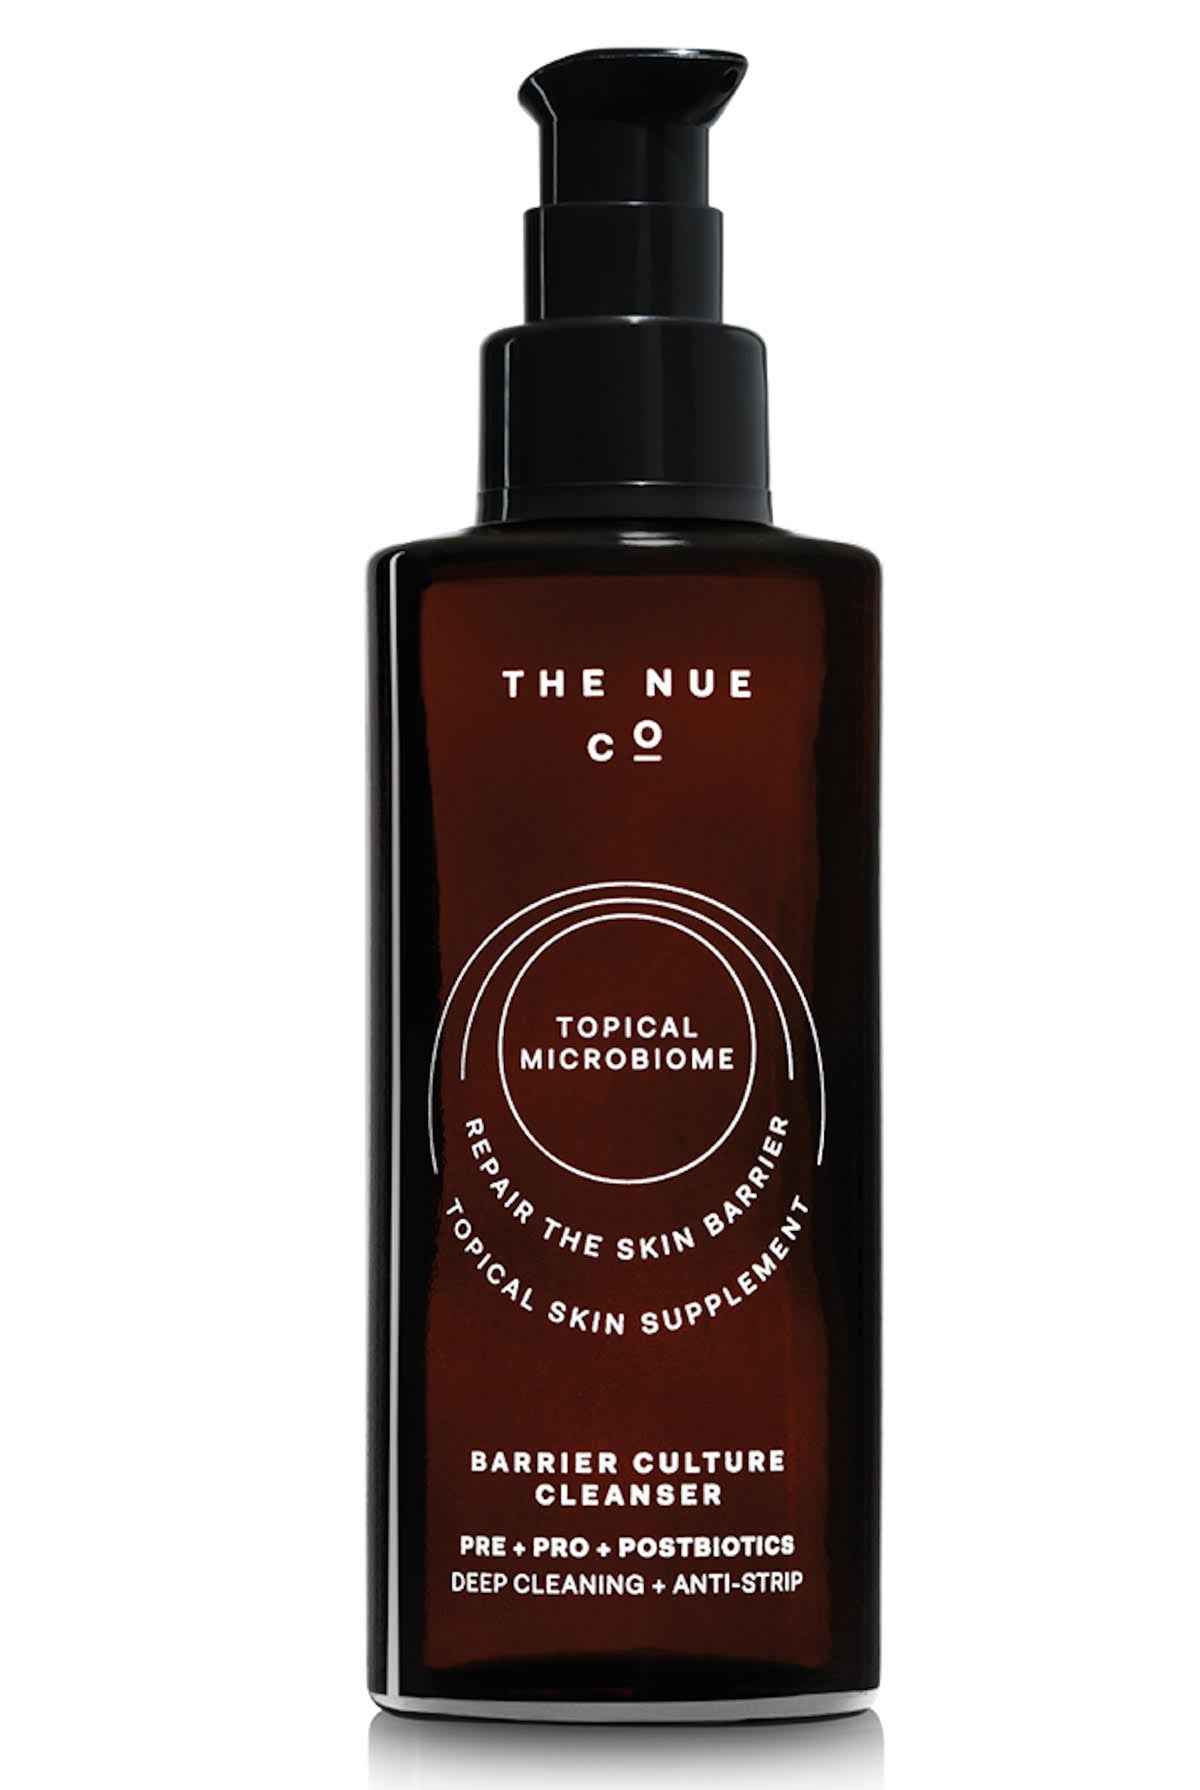 The Nue Co Barrier Culture Cleanser